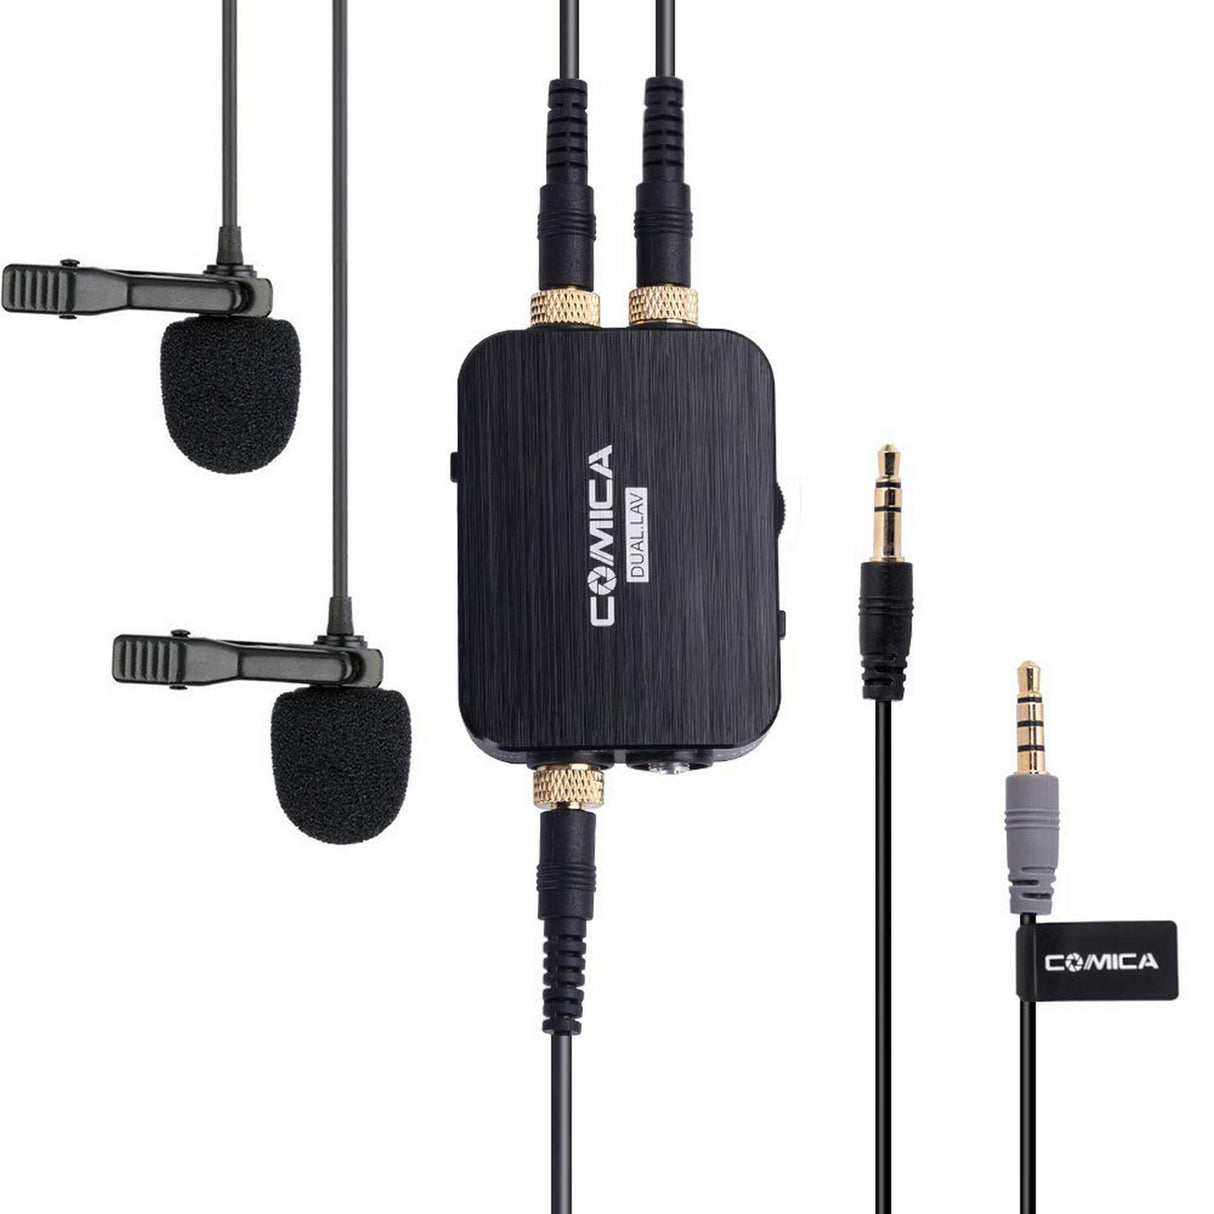 Comica DUAL.LAV D03 Dual Lavalier Microphone Kit for DSLR and Smartphones